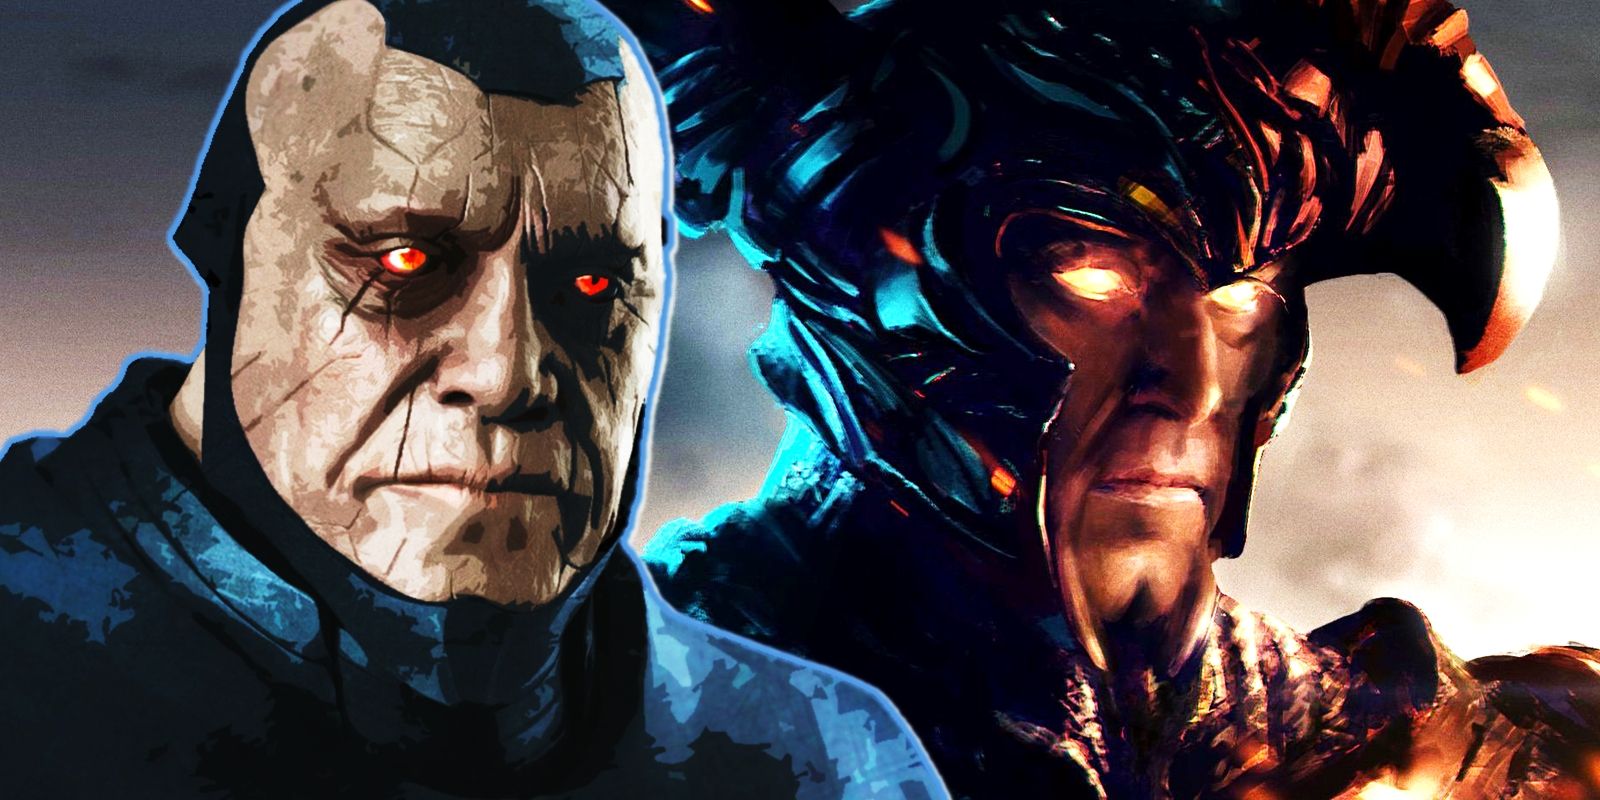 Darkseid and Steppenwolf have a ‘complex relationship’ in Snyder’s Justice League